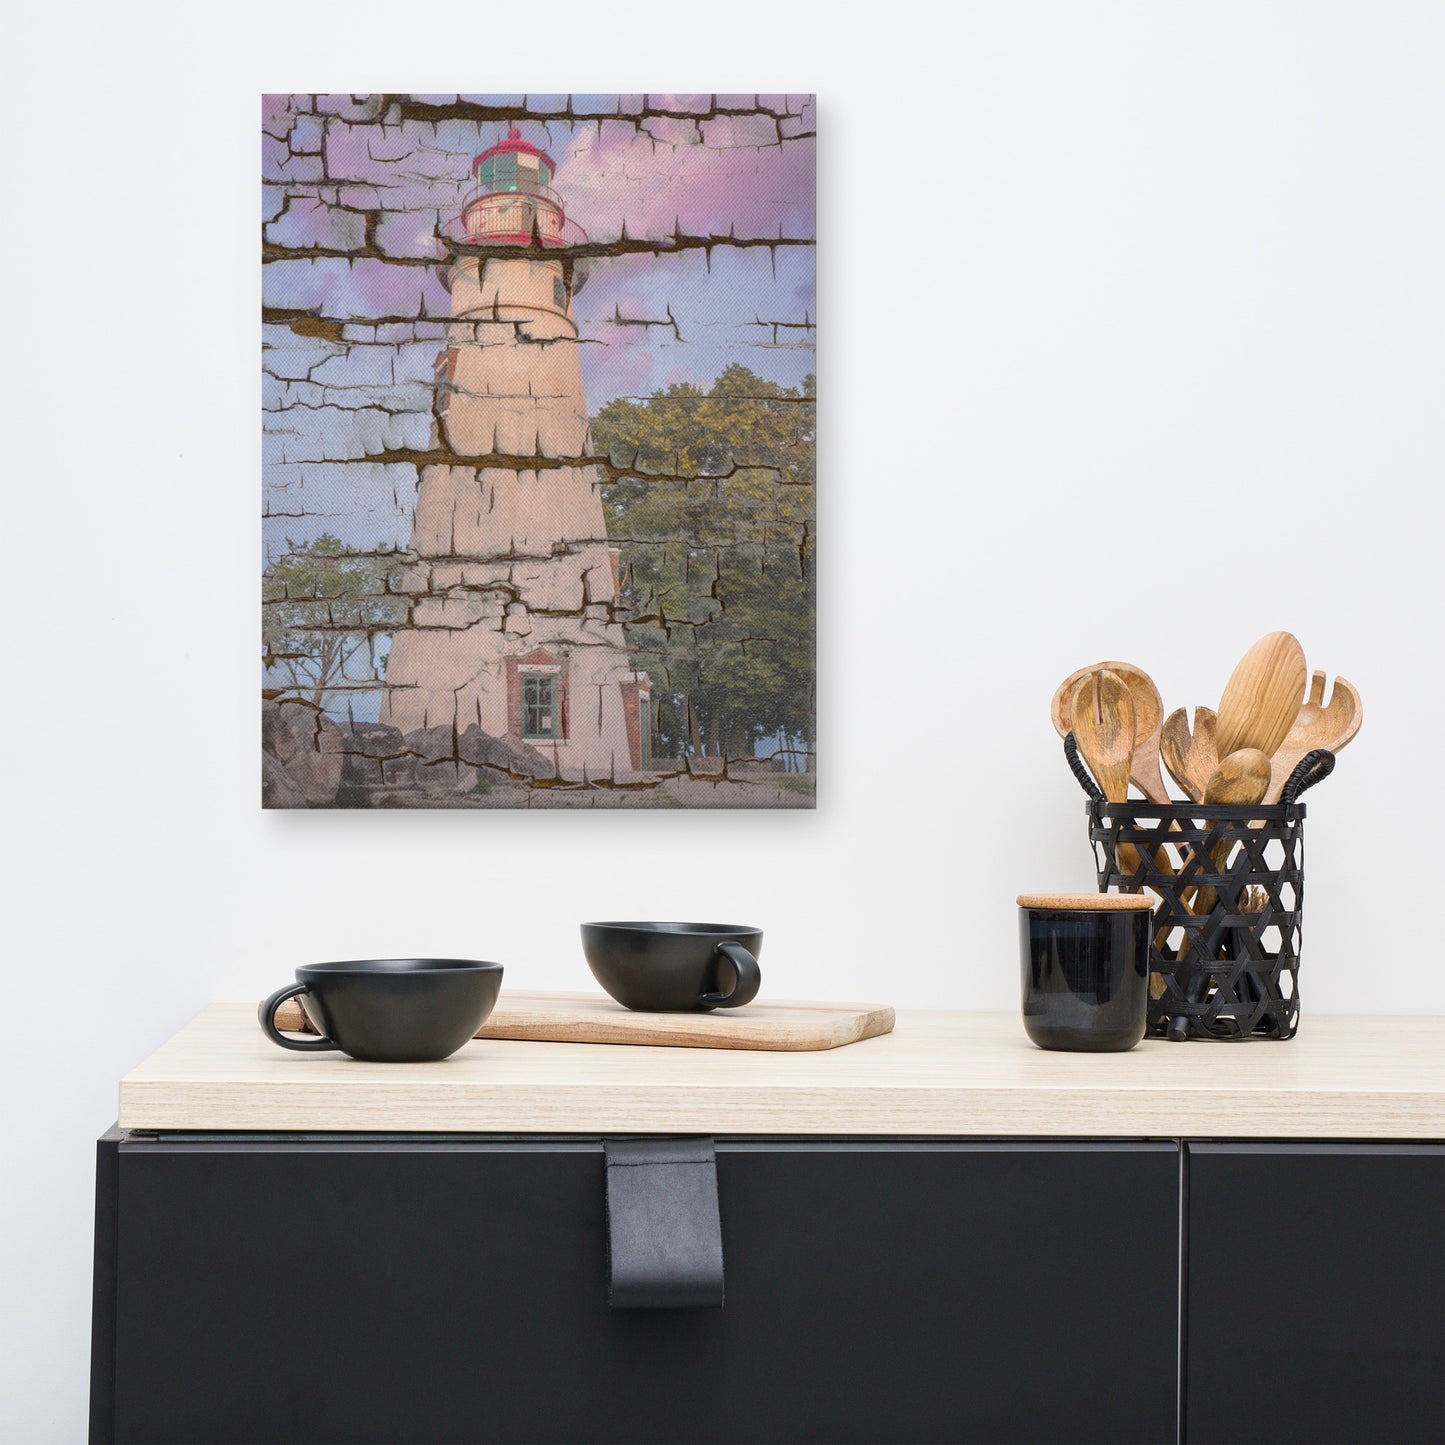 Faux Wood Texture Marblehead Lighthouse at Sunset Canvas Wall Art Prints